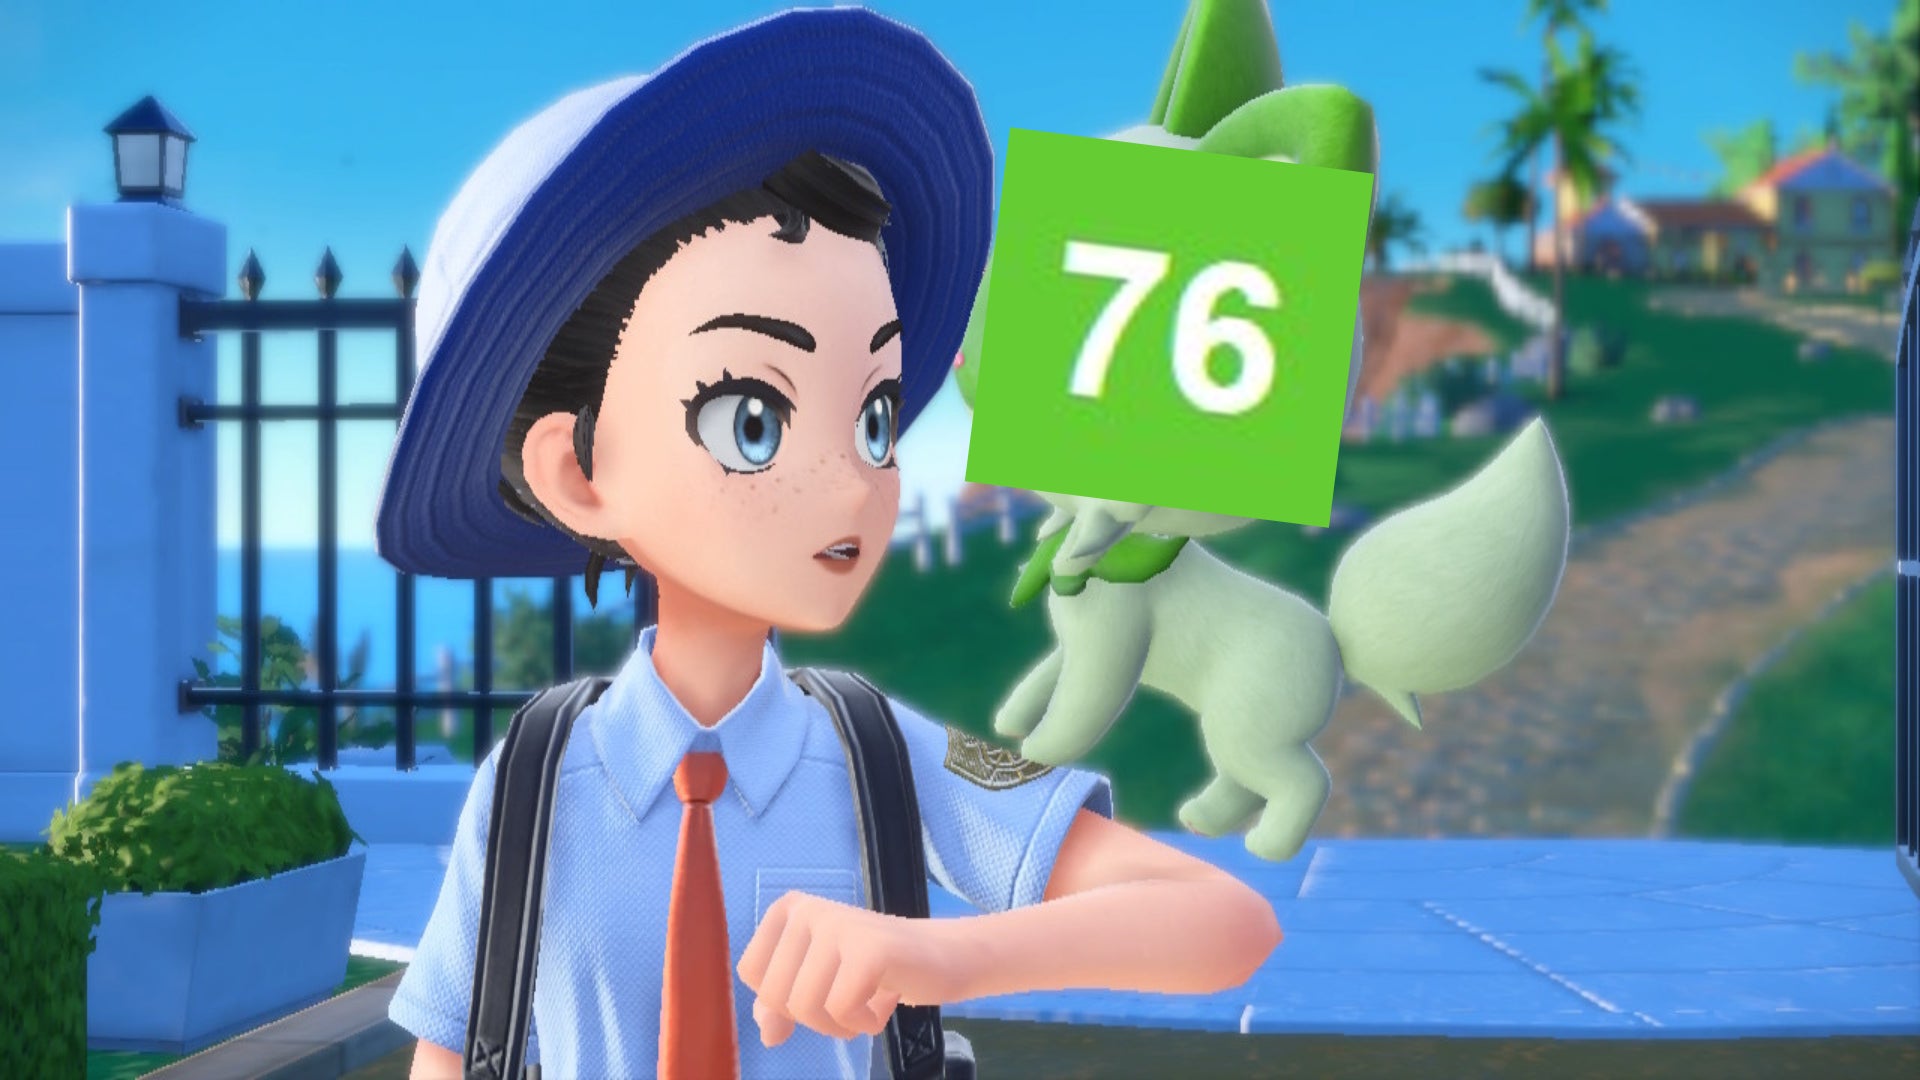 Image for Pokemon Scarlet and Violet is the series’ lowest rated mainline game on Metacritic, yet I can’t stop playing it